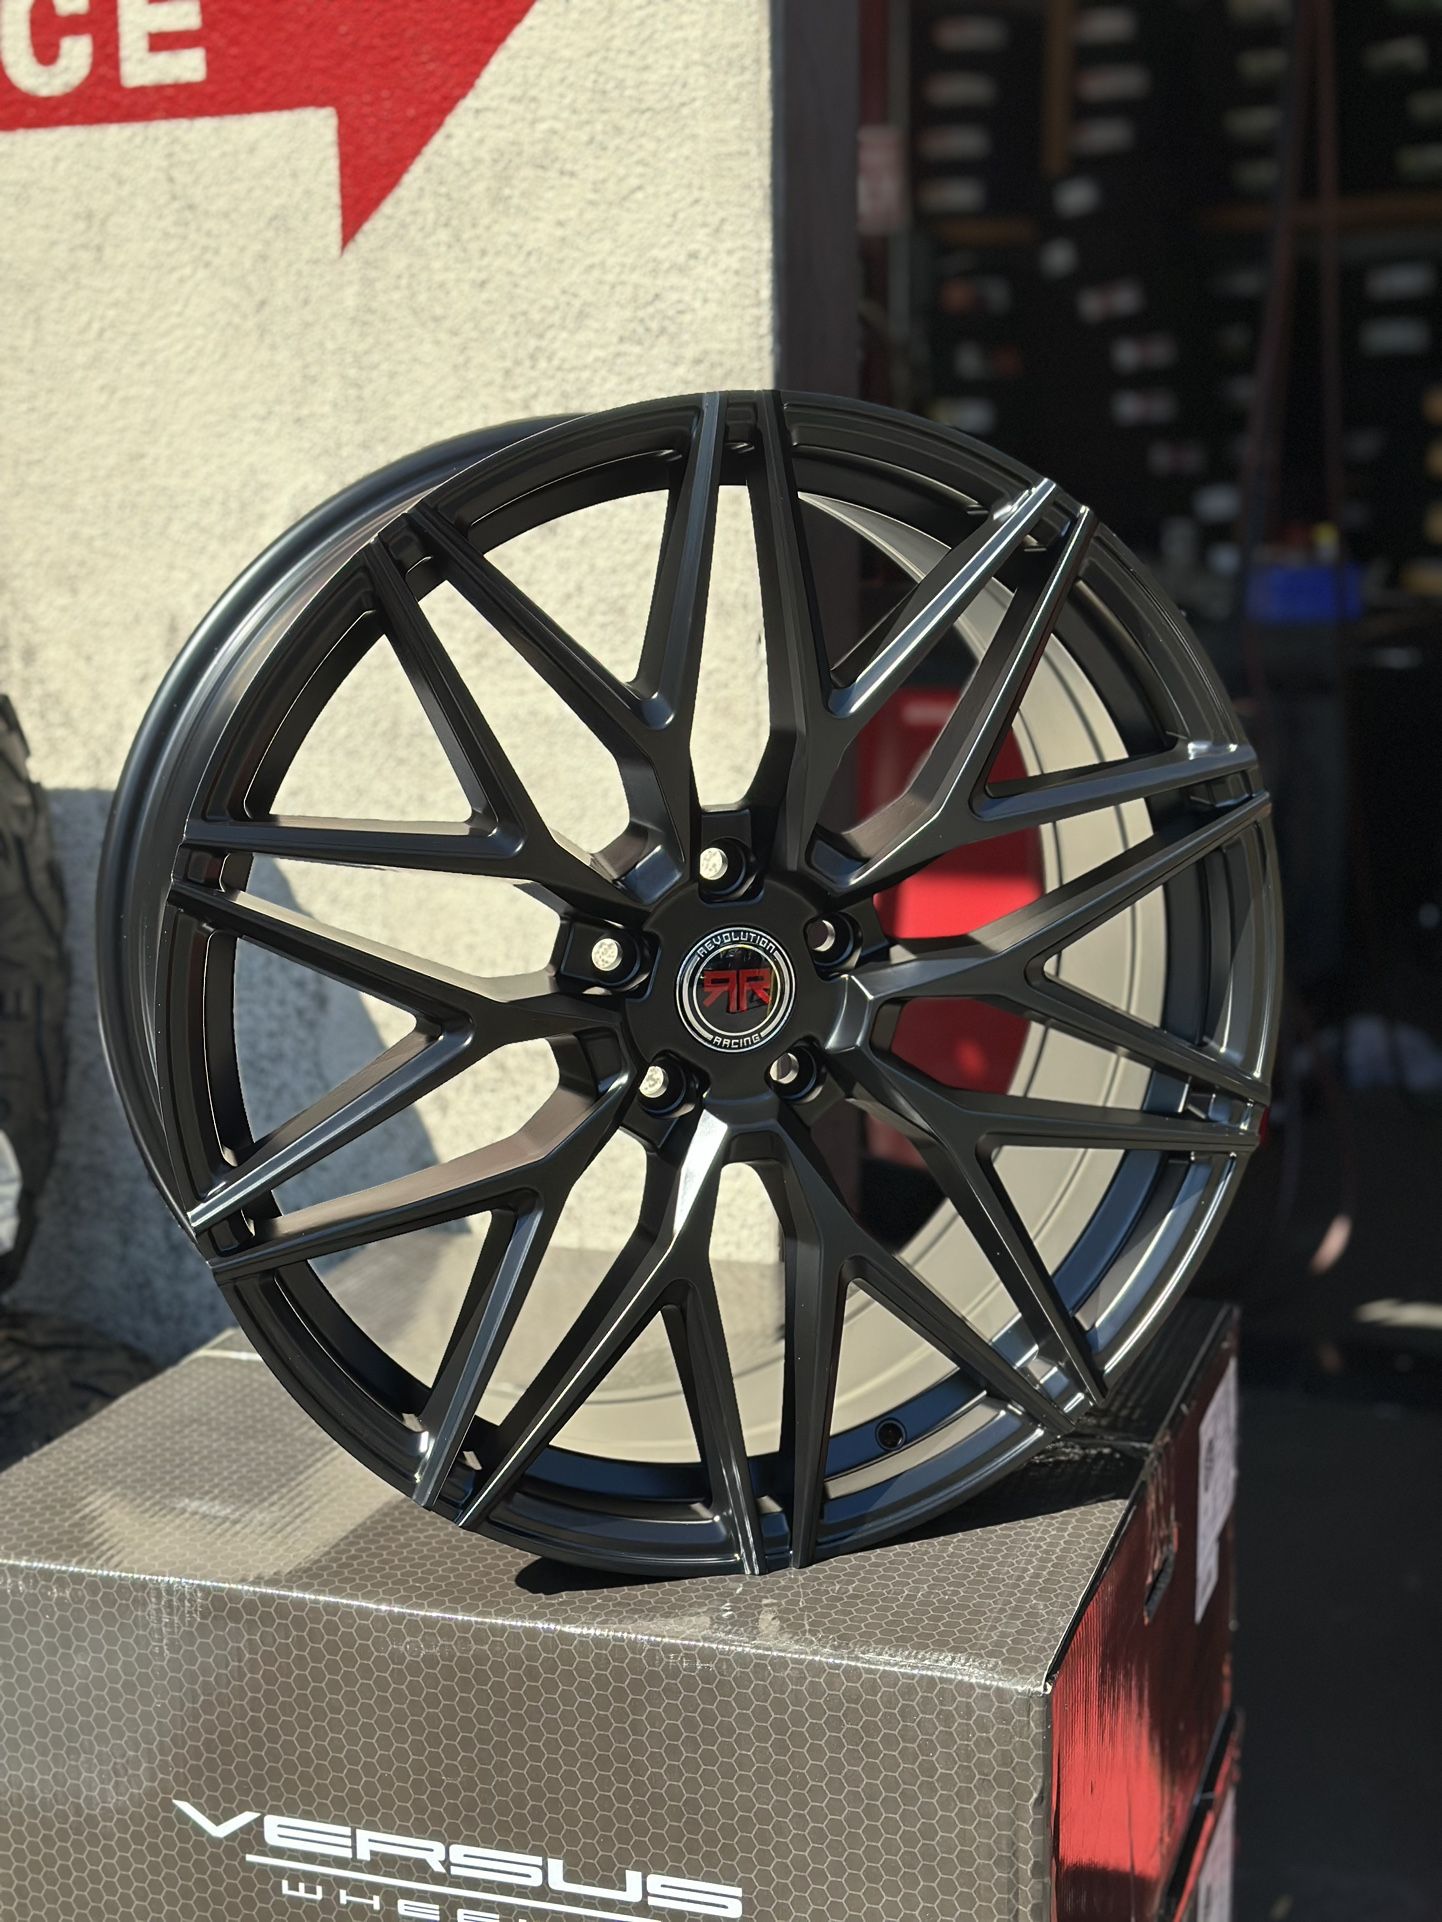 RR18 Satin Black 20x8.5 5x114.3 +35 Rims Tires Package Finance Available 